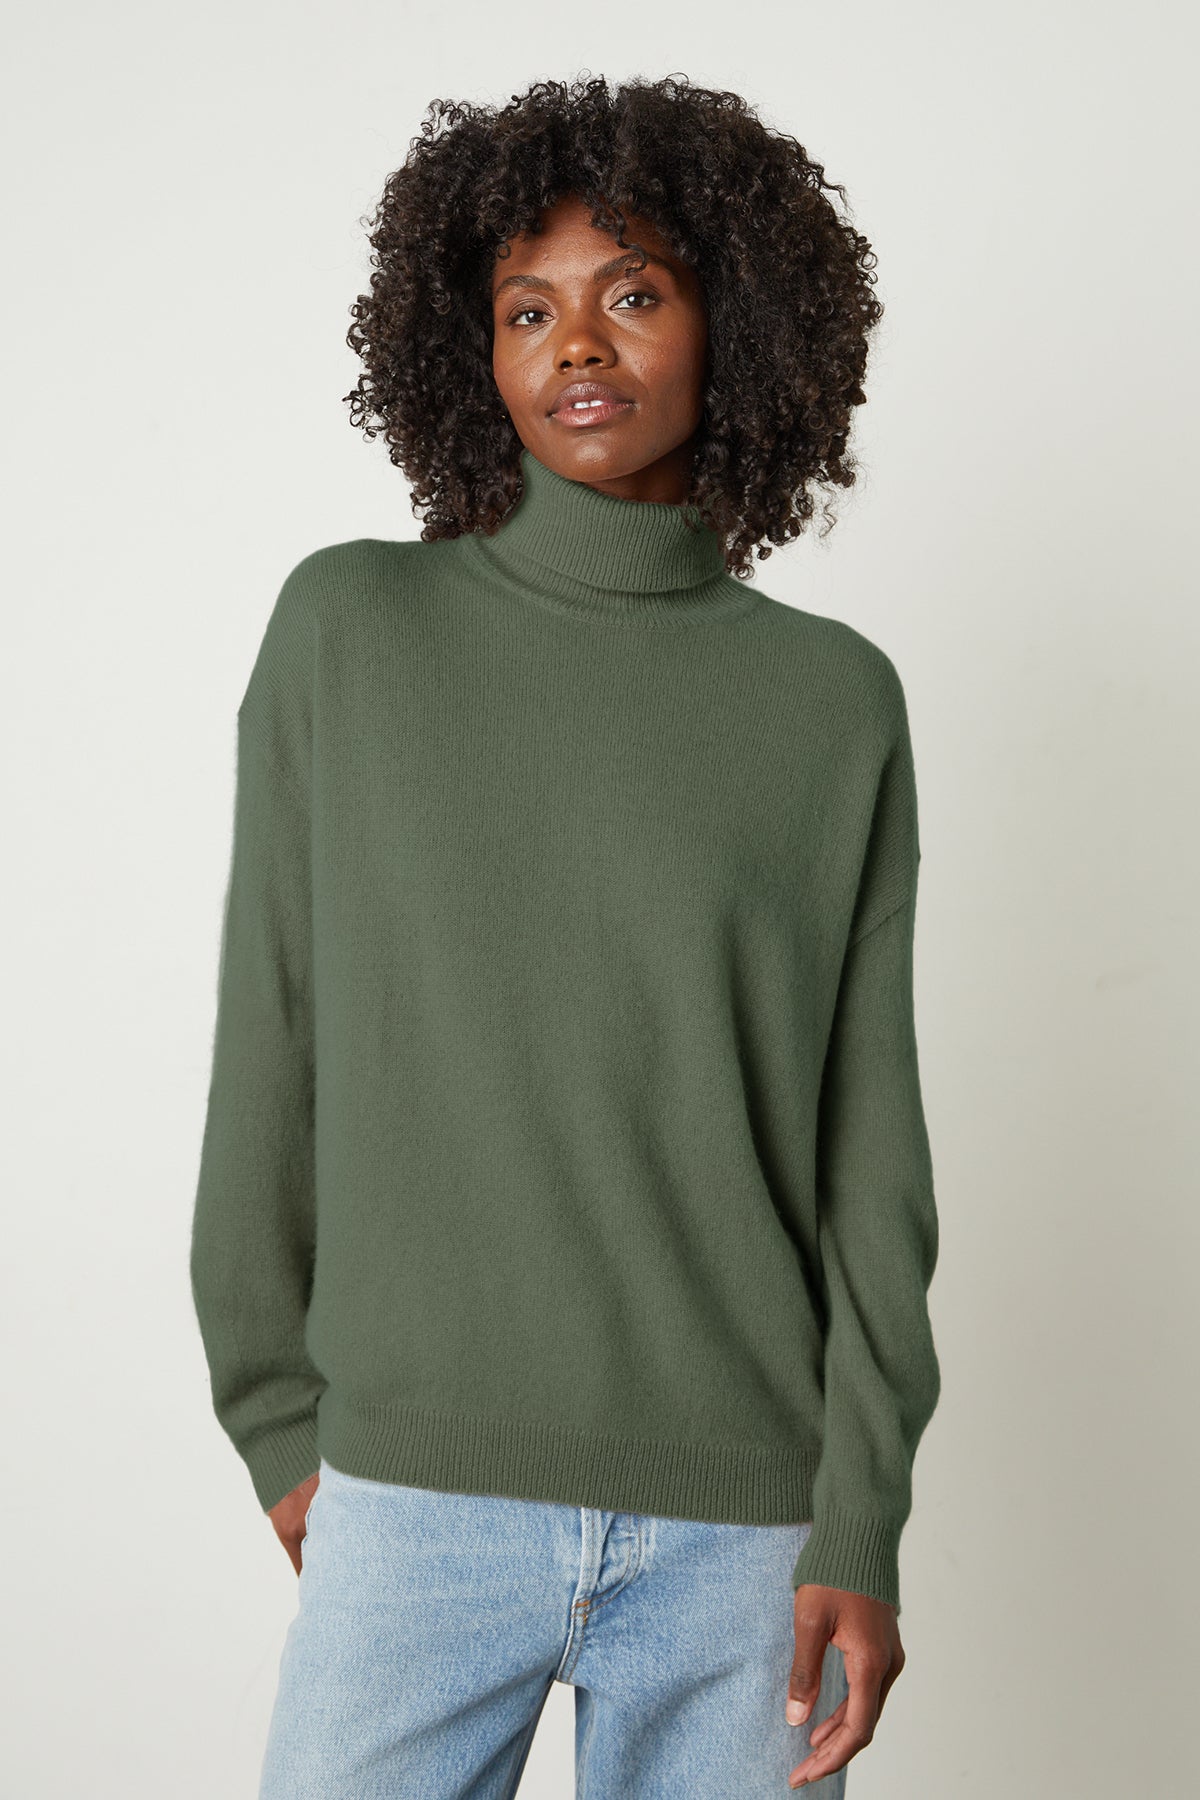 Ellie Sweater in Forest Front-26064606953665